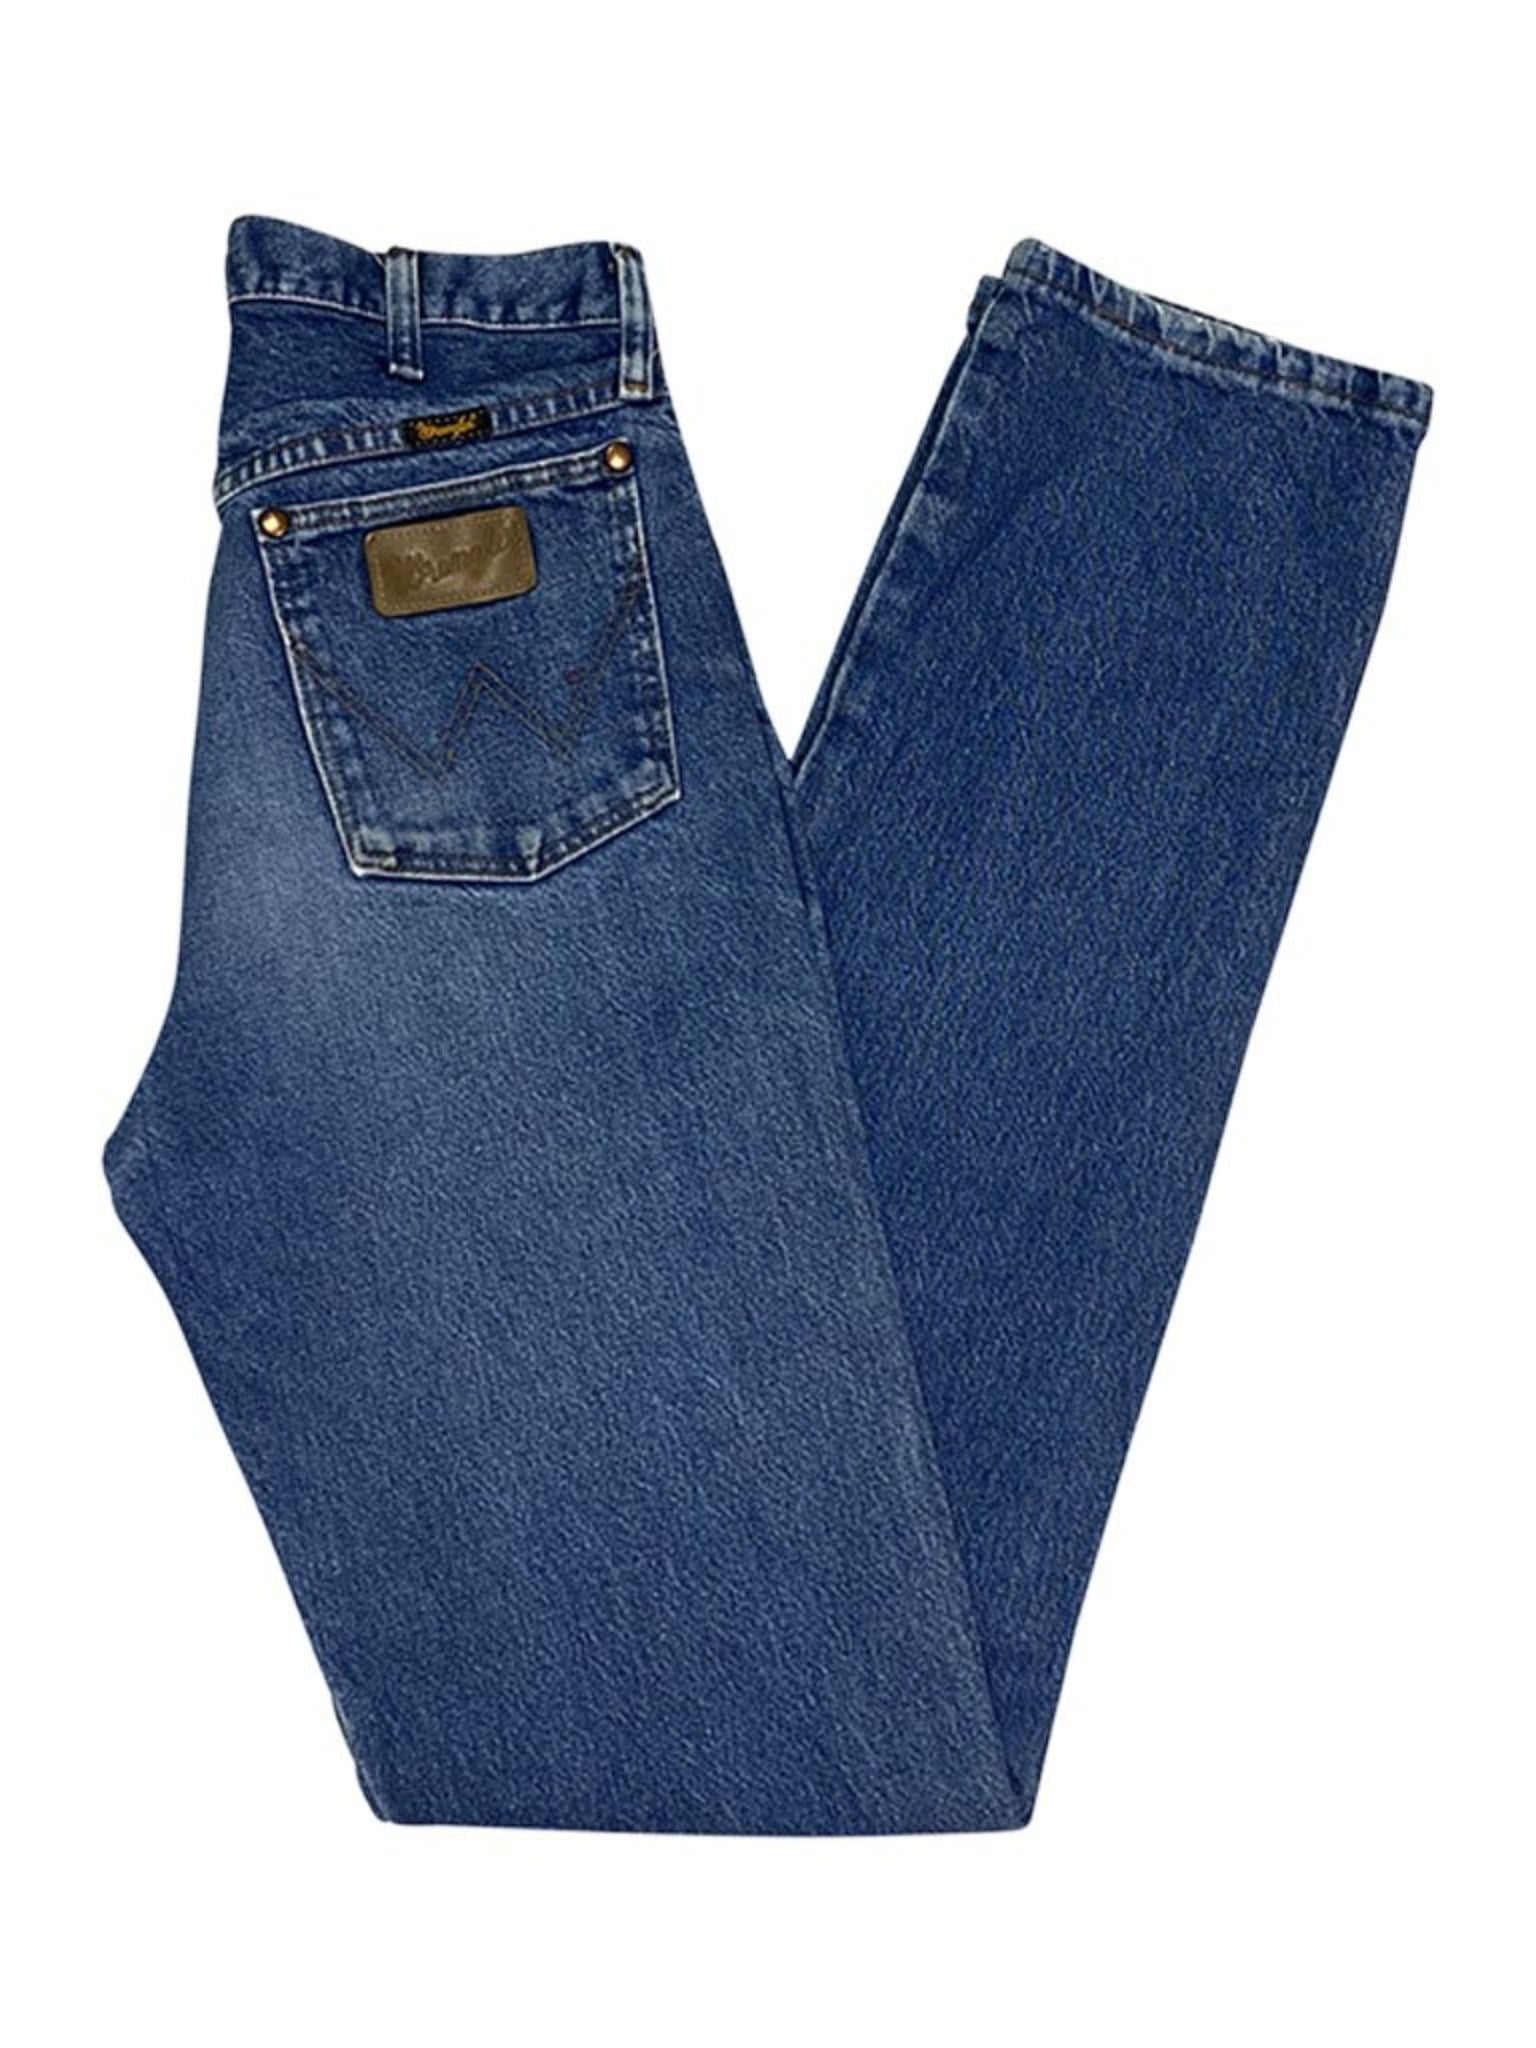 Wholesale designer jeans patch For A Pull-On Classic Look